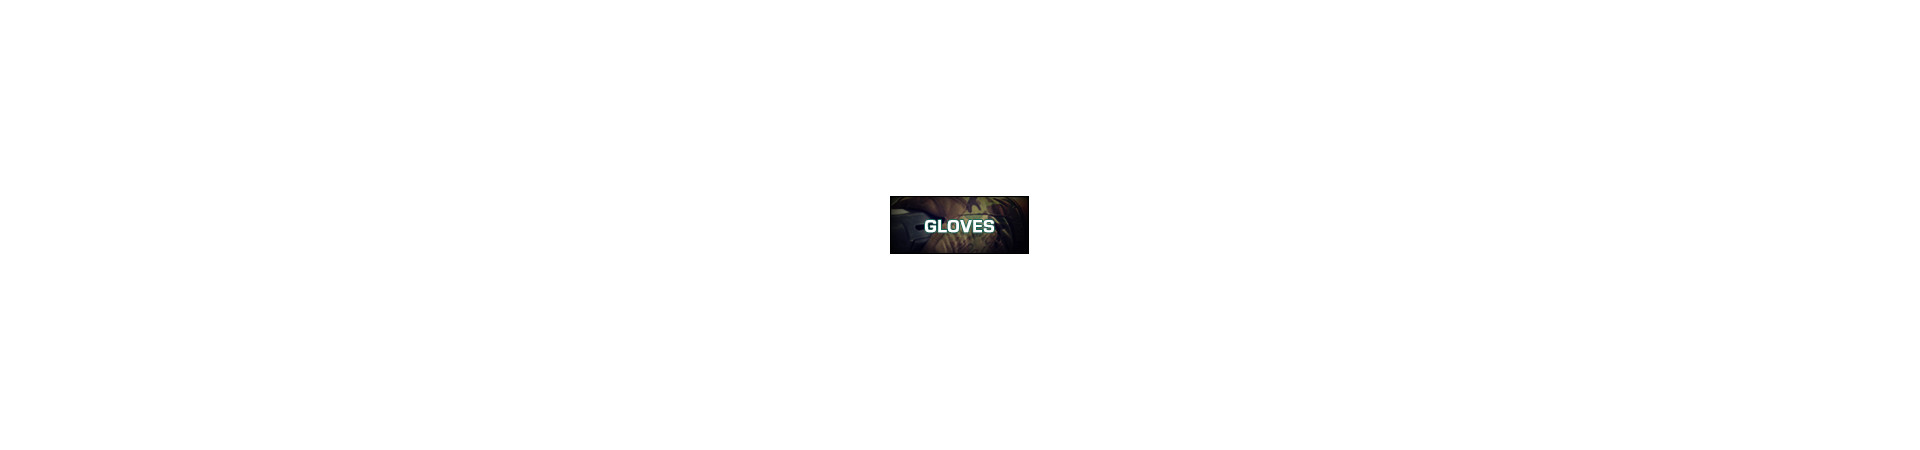 Gloves, Knee and Elbow Pads